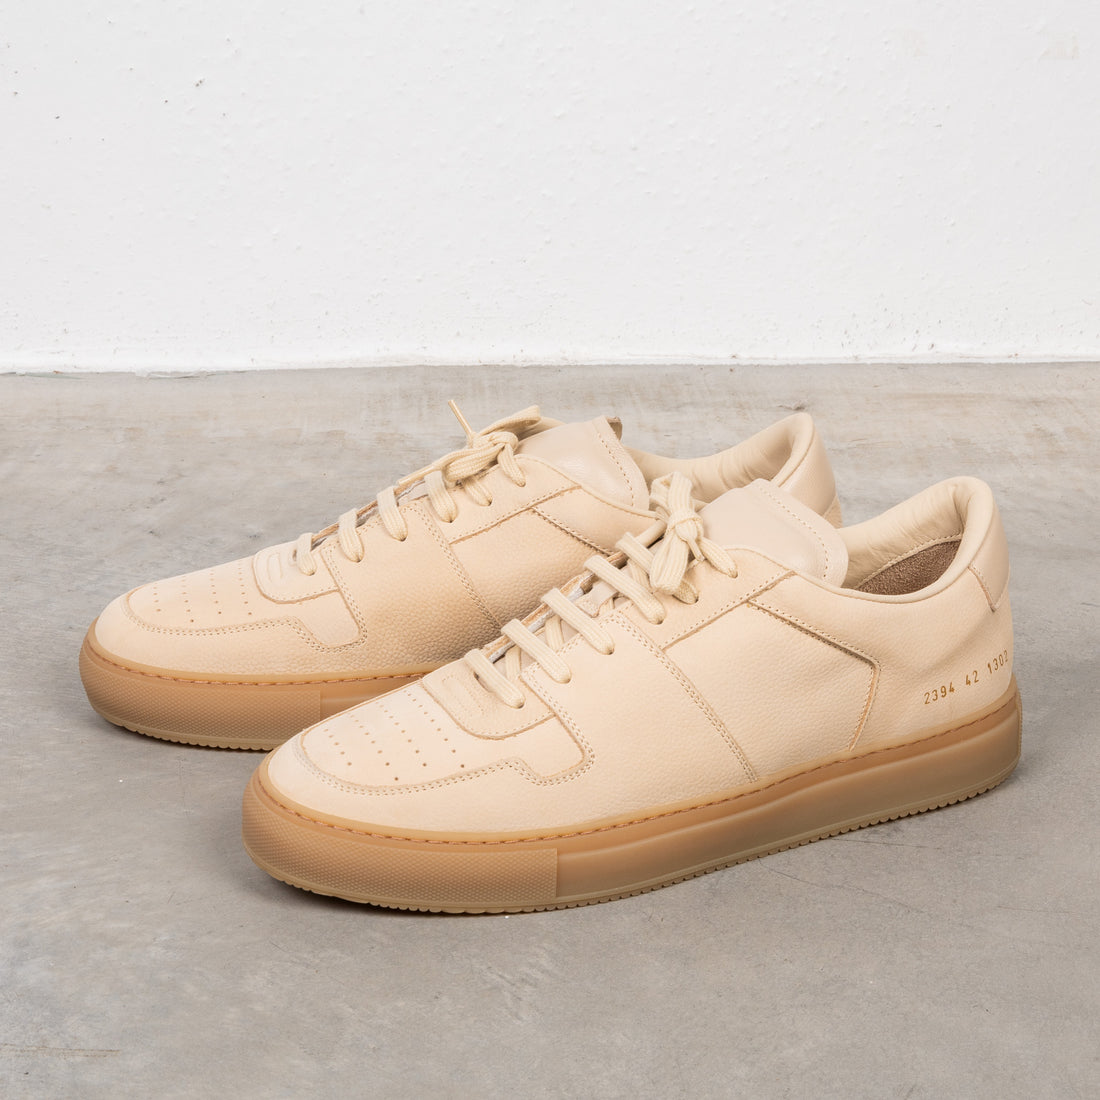 Common Projects Decades Tan